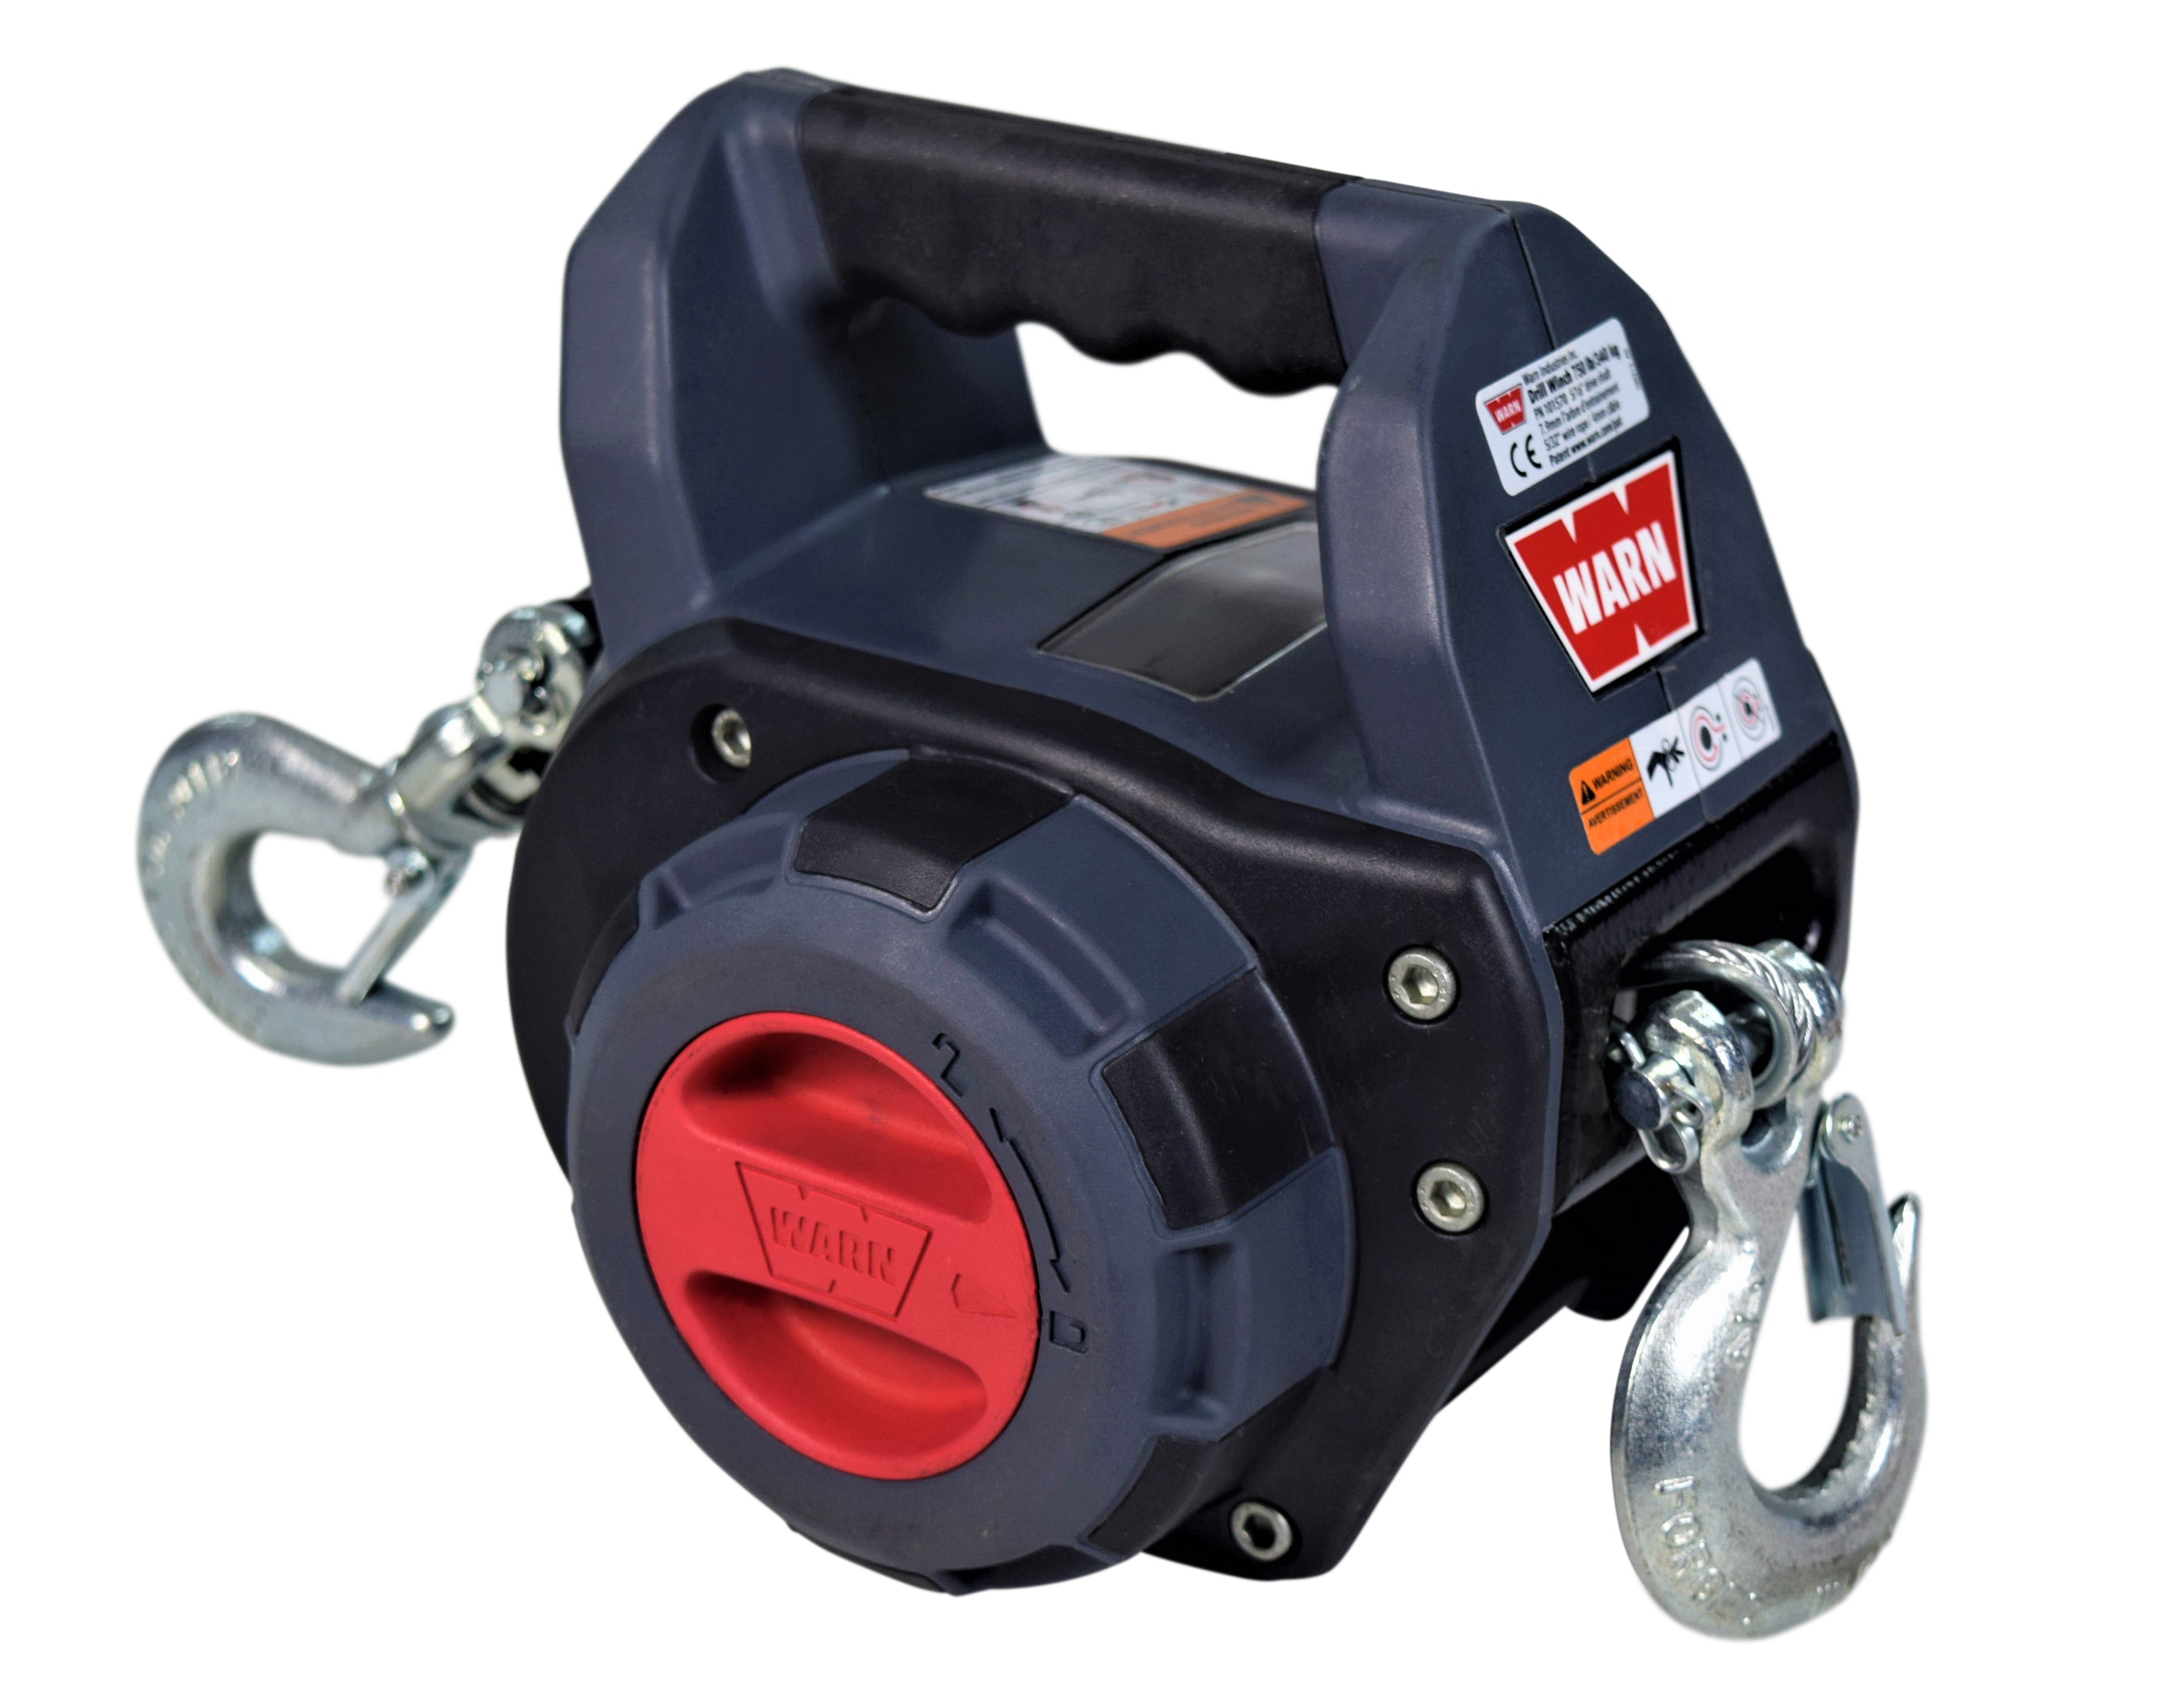 Warn-101575-Drill-Winch-750-lbs-Capacity-40-Synthetic-Rope-Free-spool-Clutch-image-2